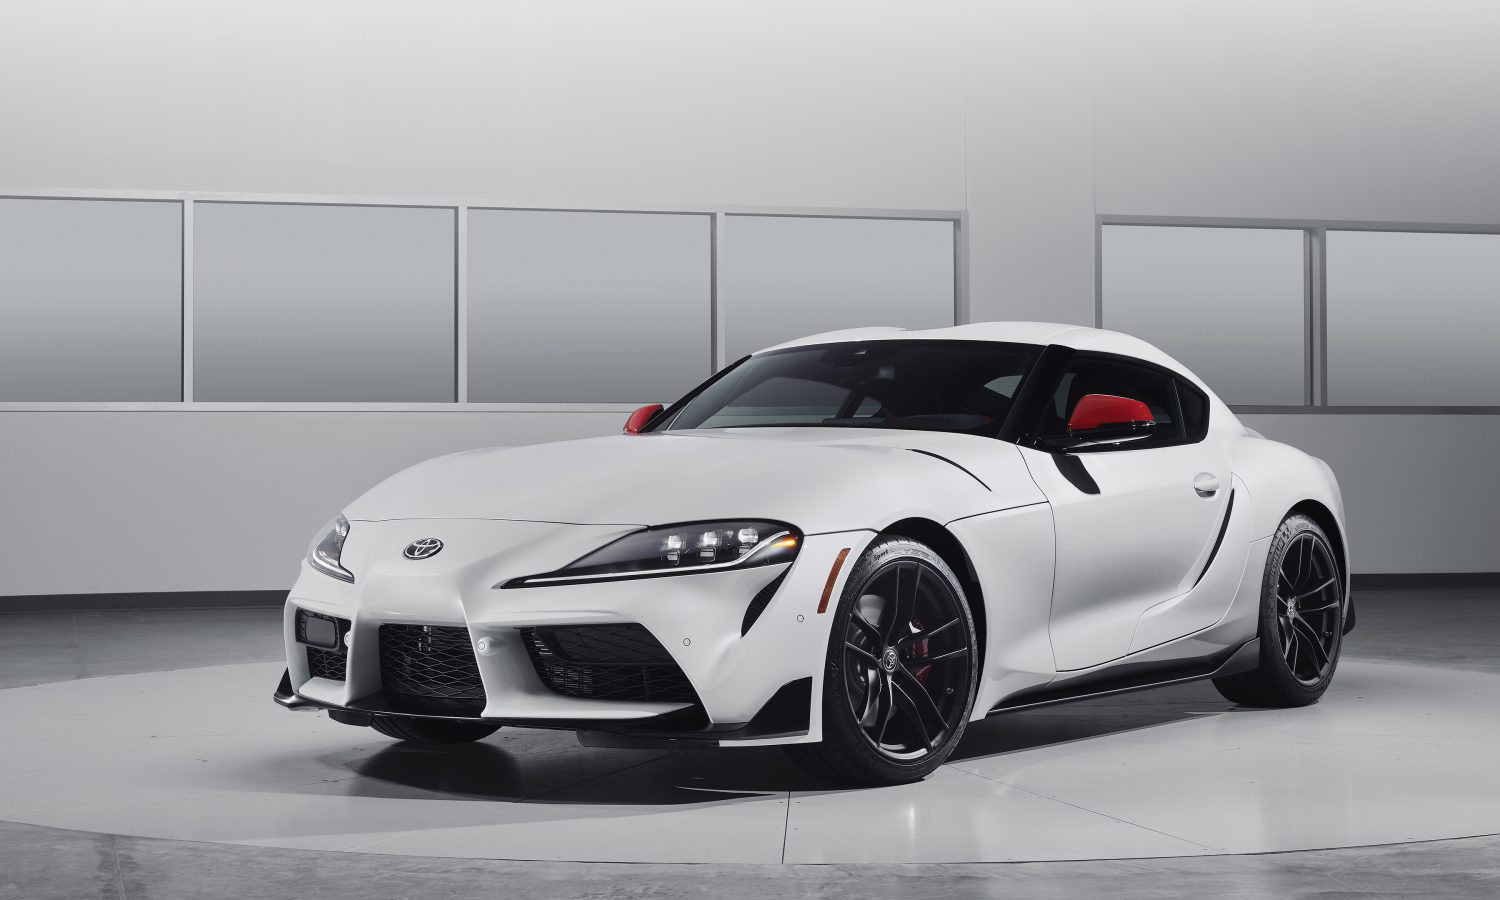 Supra is Back with Starting MSRP of $49,990 - Toyota USA Newsroom